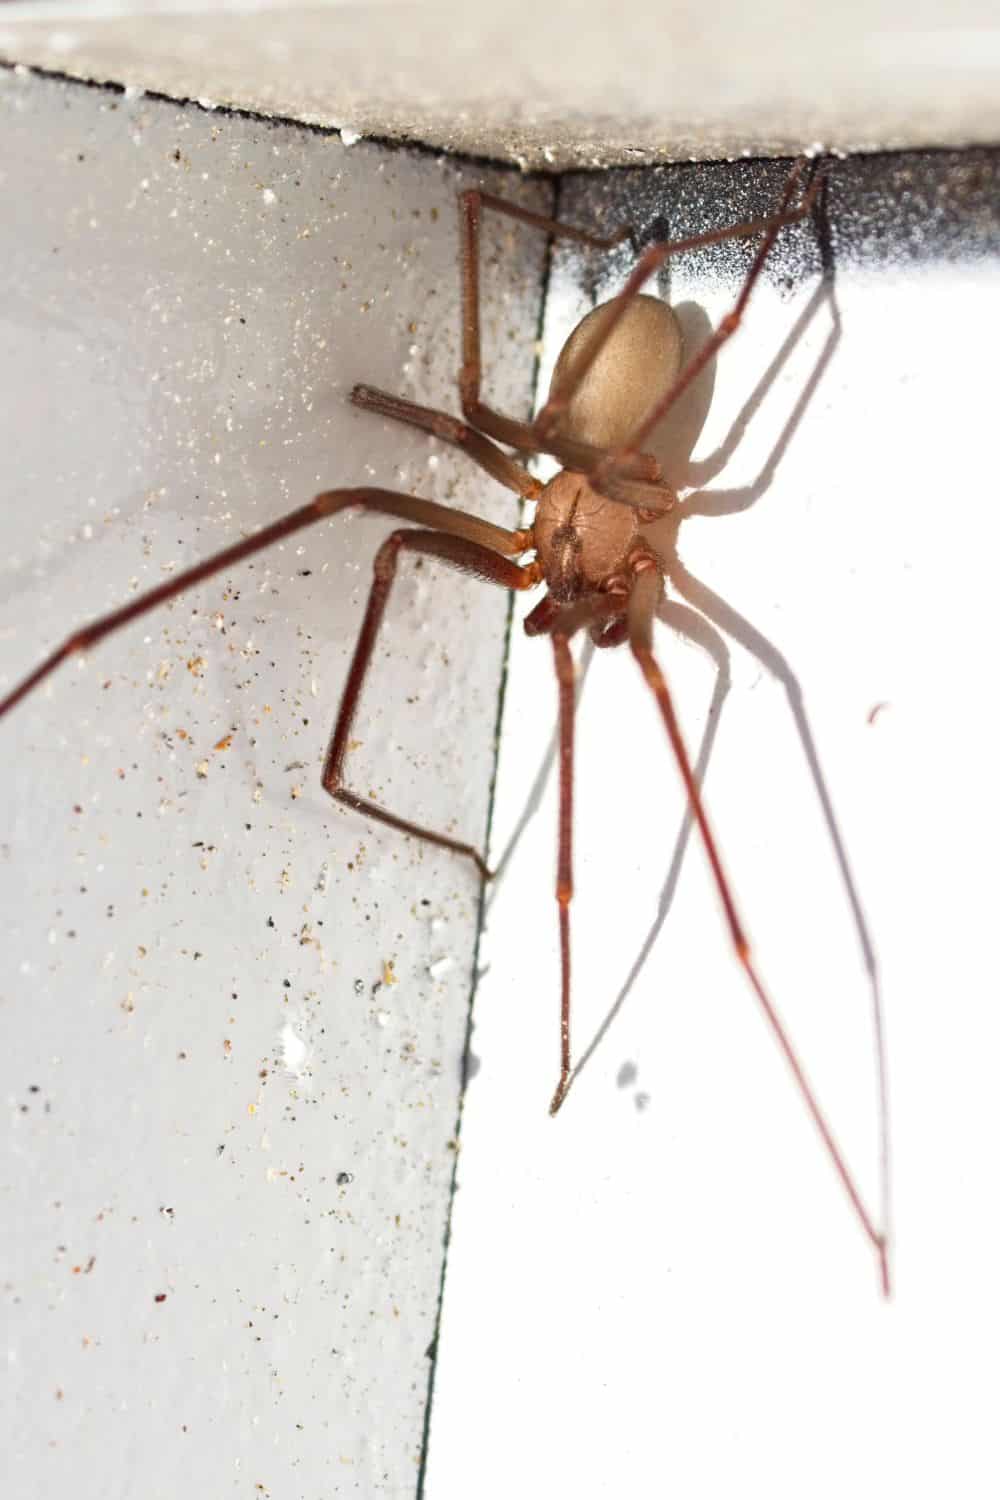 Signs Of A Brown Recluse Spider Infestation In Your Home 1